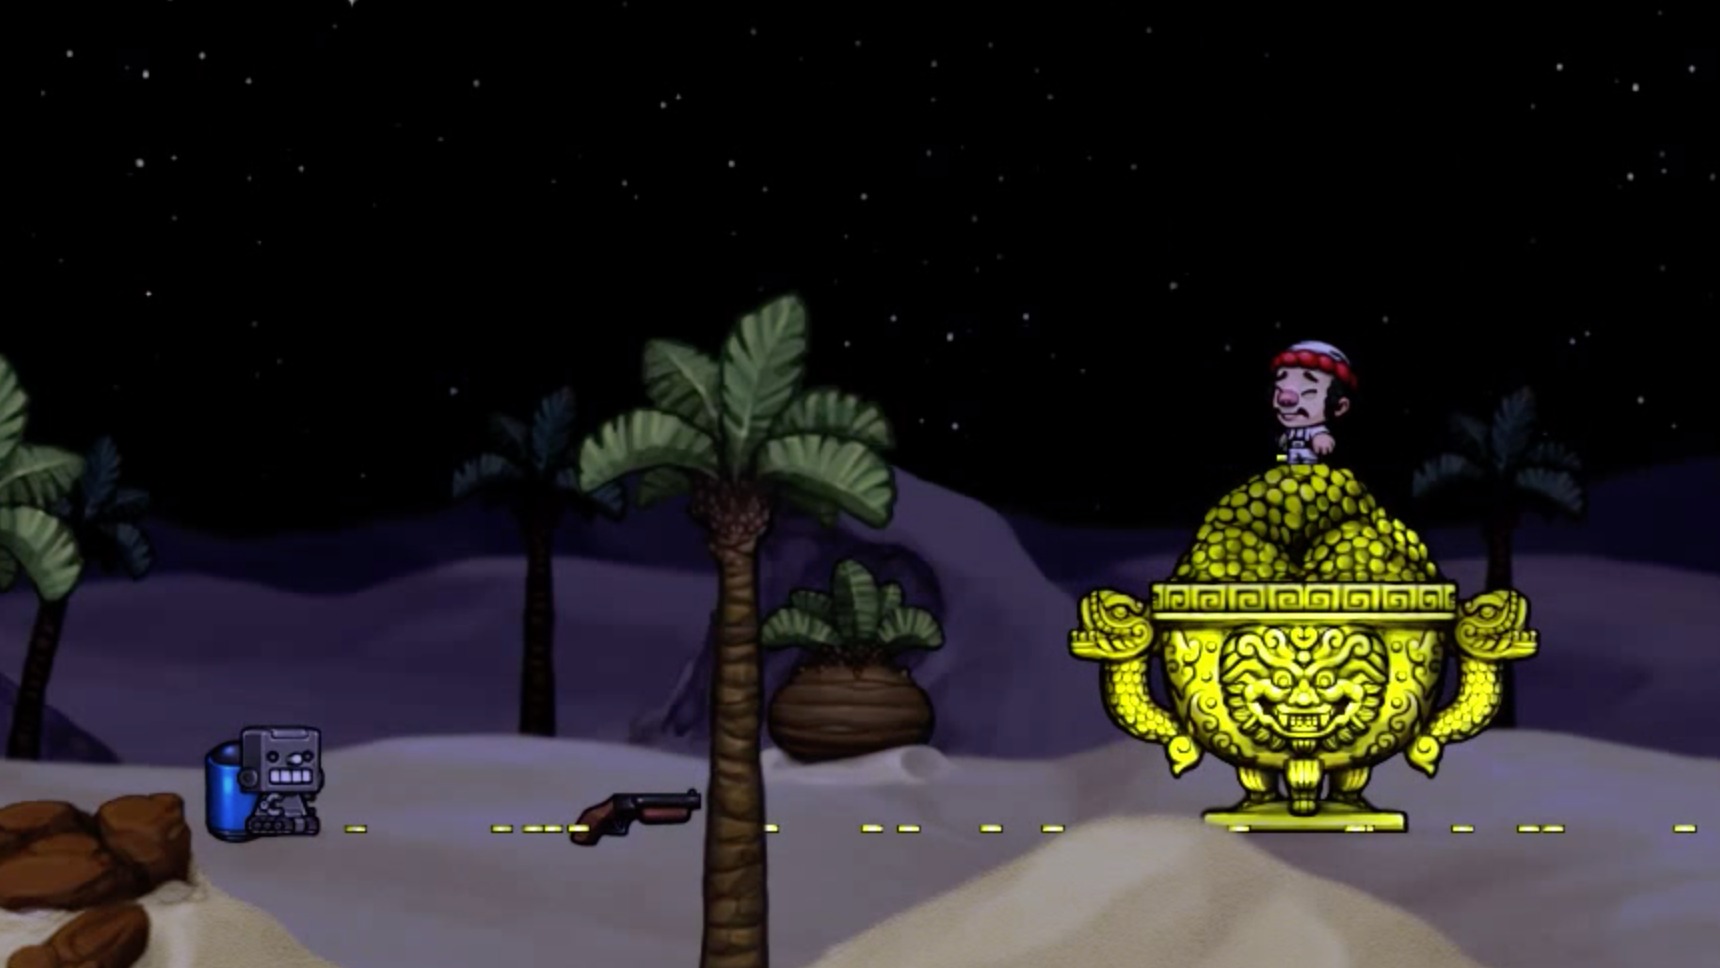 A screenshot showing Spelunky's victory screen